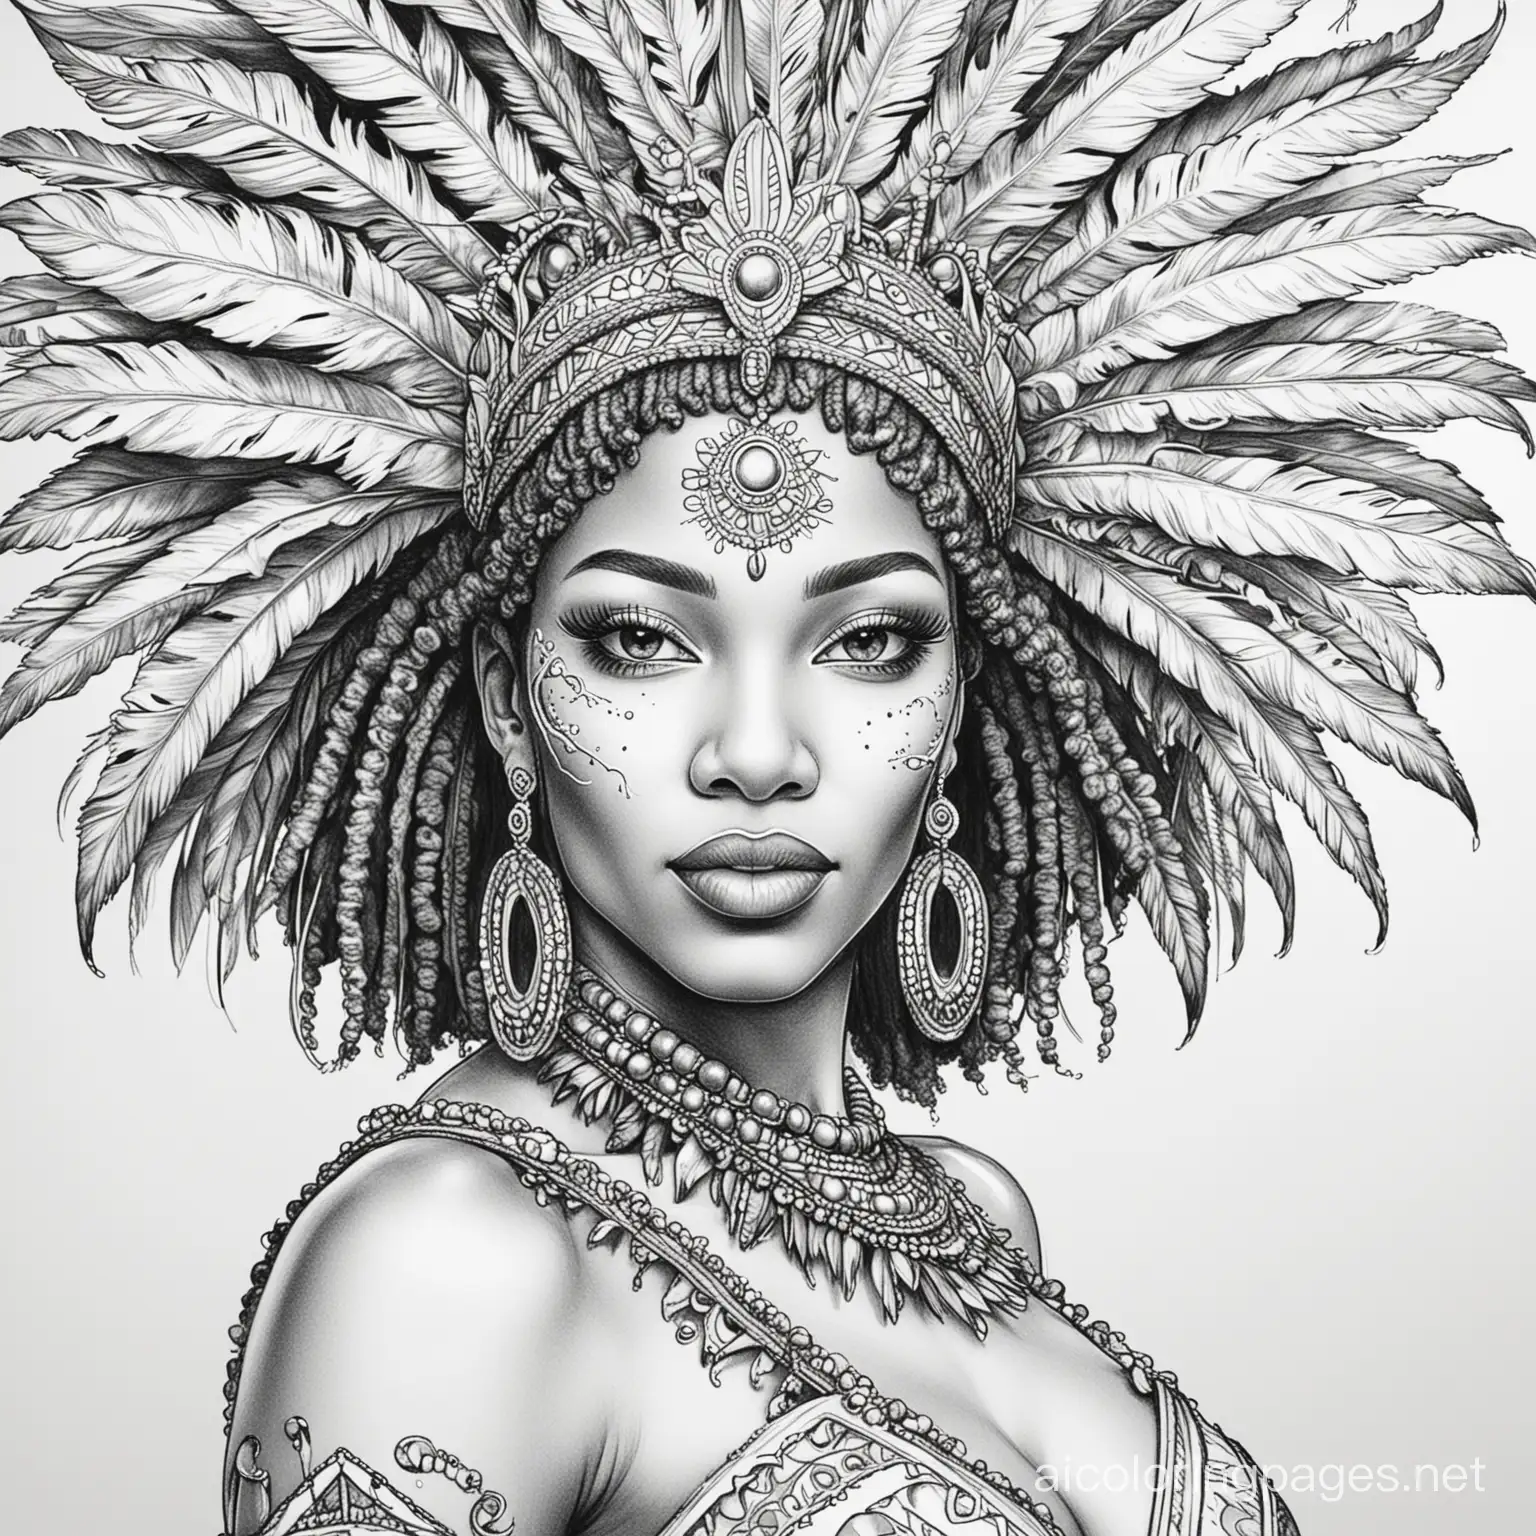 beautiful jamaican woman Caribbean carnival, Coloring Page, black and white, line art, white background, Simplicity, Ample White Space. The background of the coloring page is plain white to make it easy for young children to color within the lines. The outlines of all the subjects are easy to distinguish, making it simple for kids to color without too much difficulty